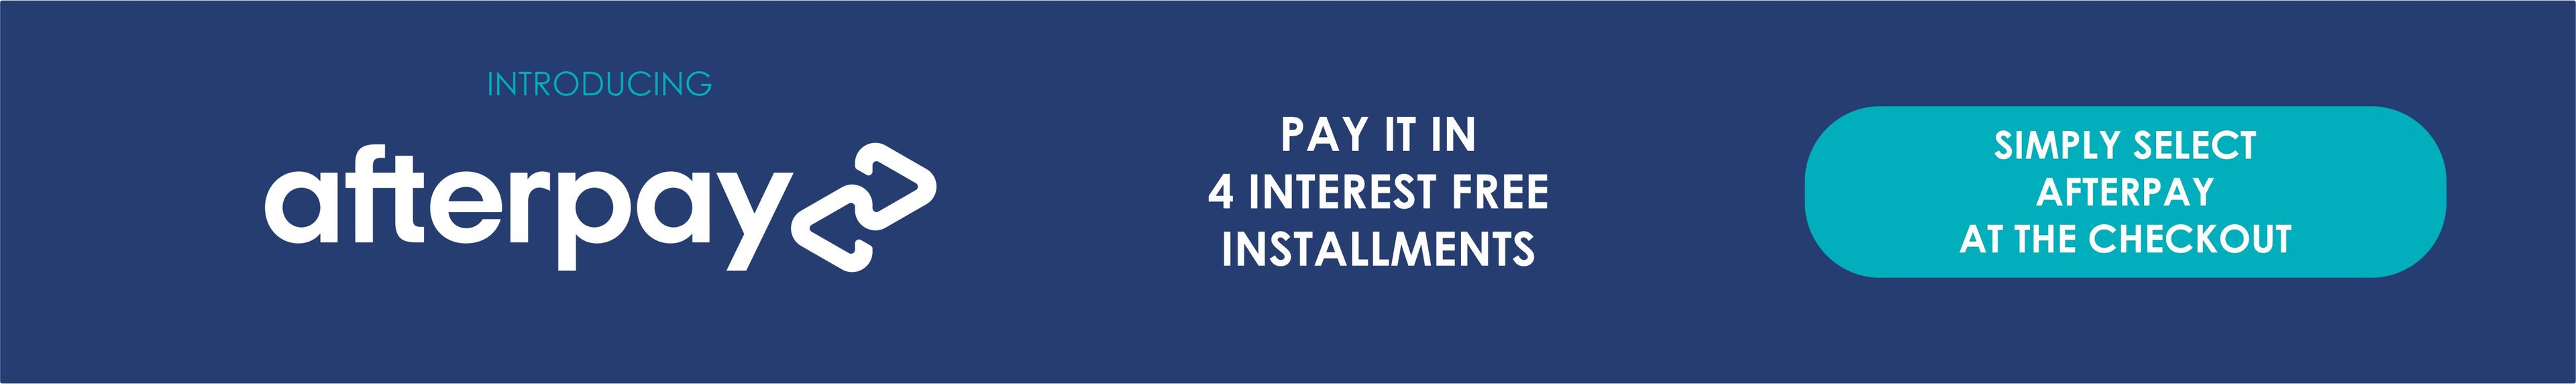 PAY IN 4 INSTALLMENTS WITH AFTERPAY